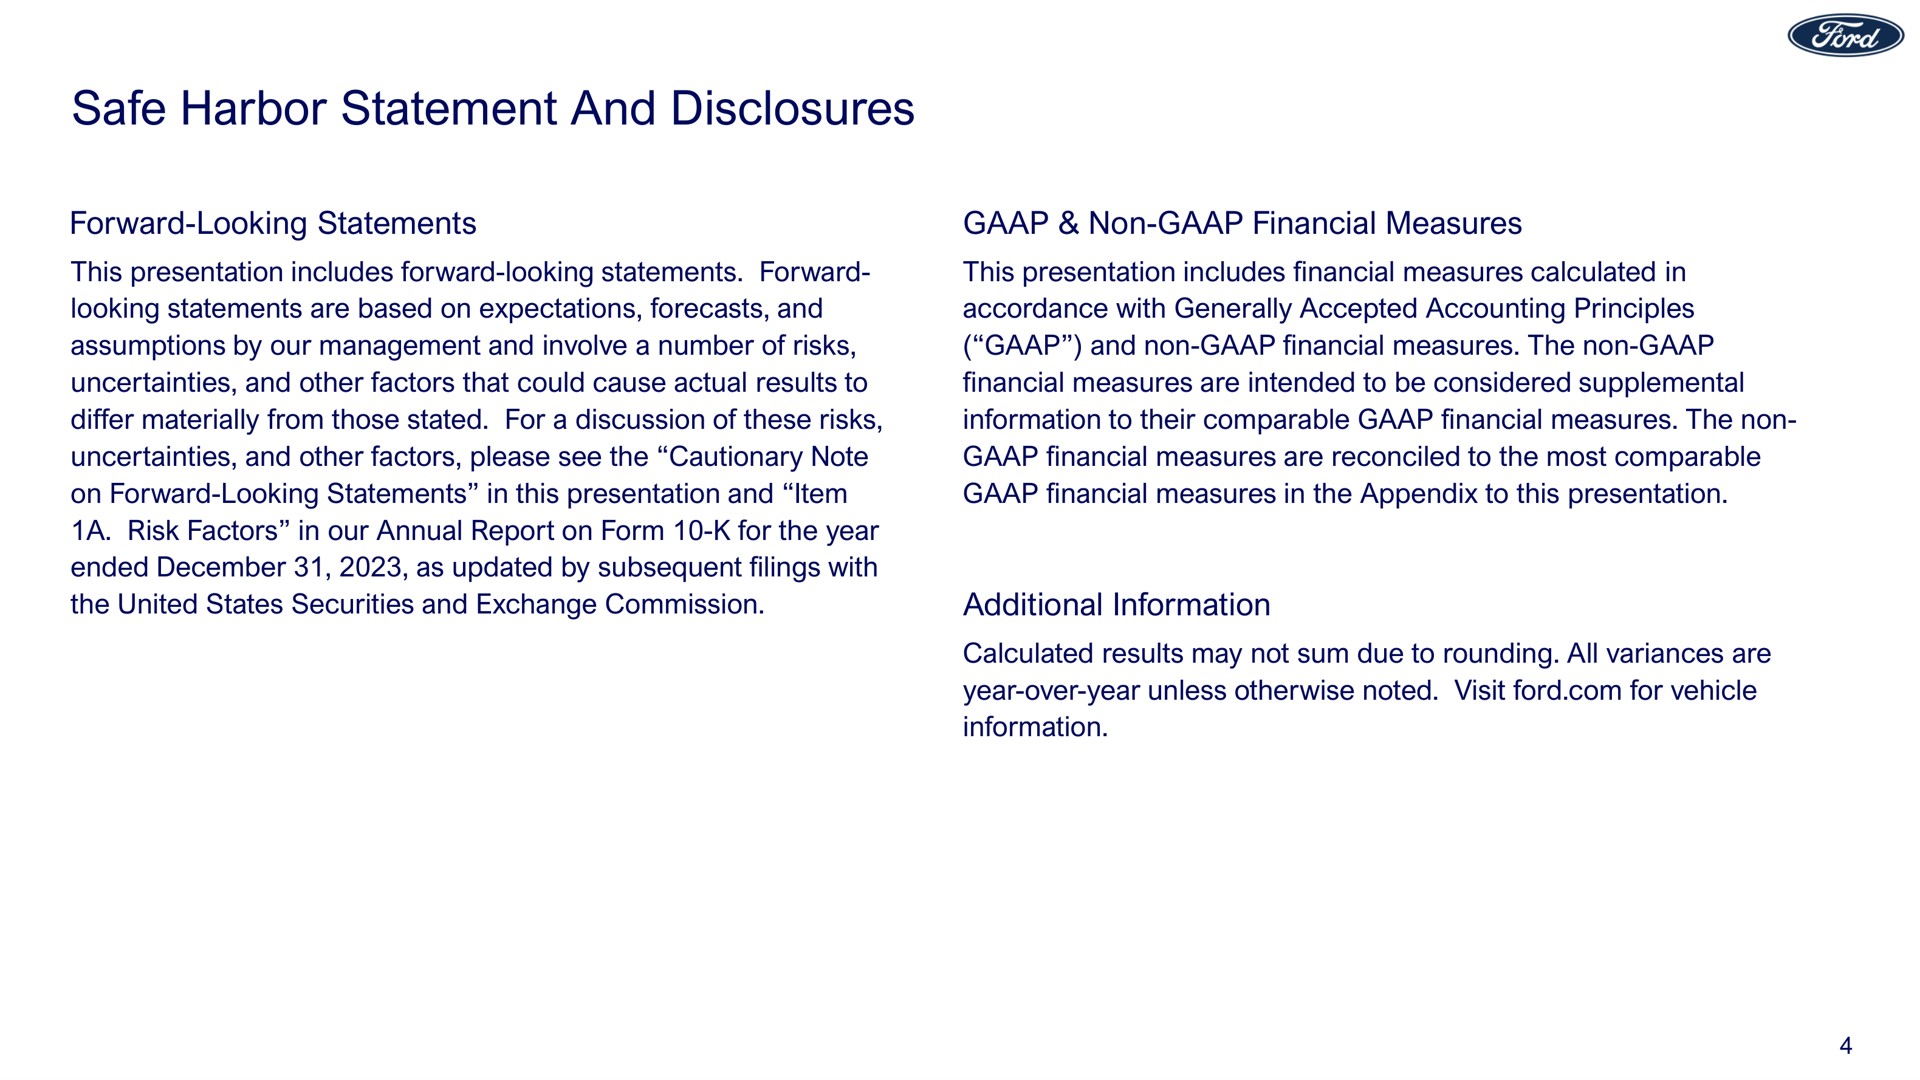 safe harbor statement and disclosures forward looking statements non financial measures additional information | Ford